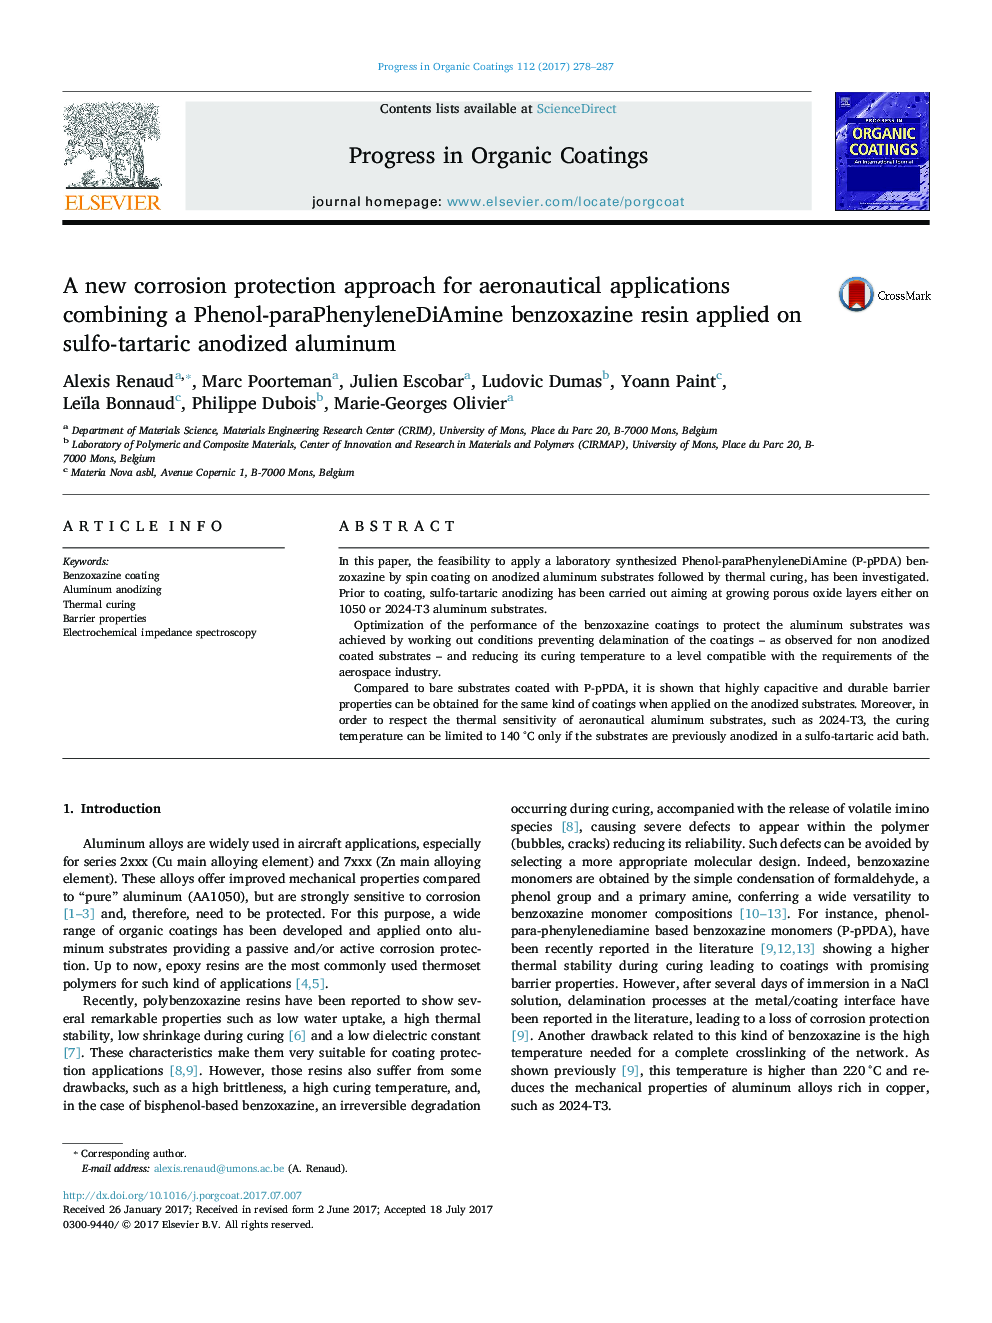 A new corrosion protection approach for aeronautical applications combining a Phenol-paraPhenyleneDiAmine benzoxazine resin applied on sulfo-tartaric anodized aluminum